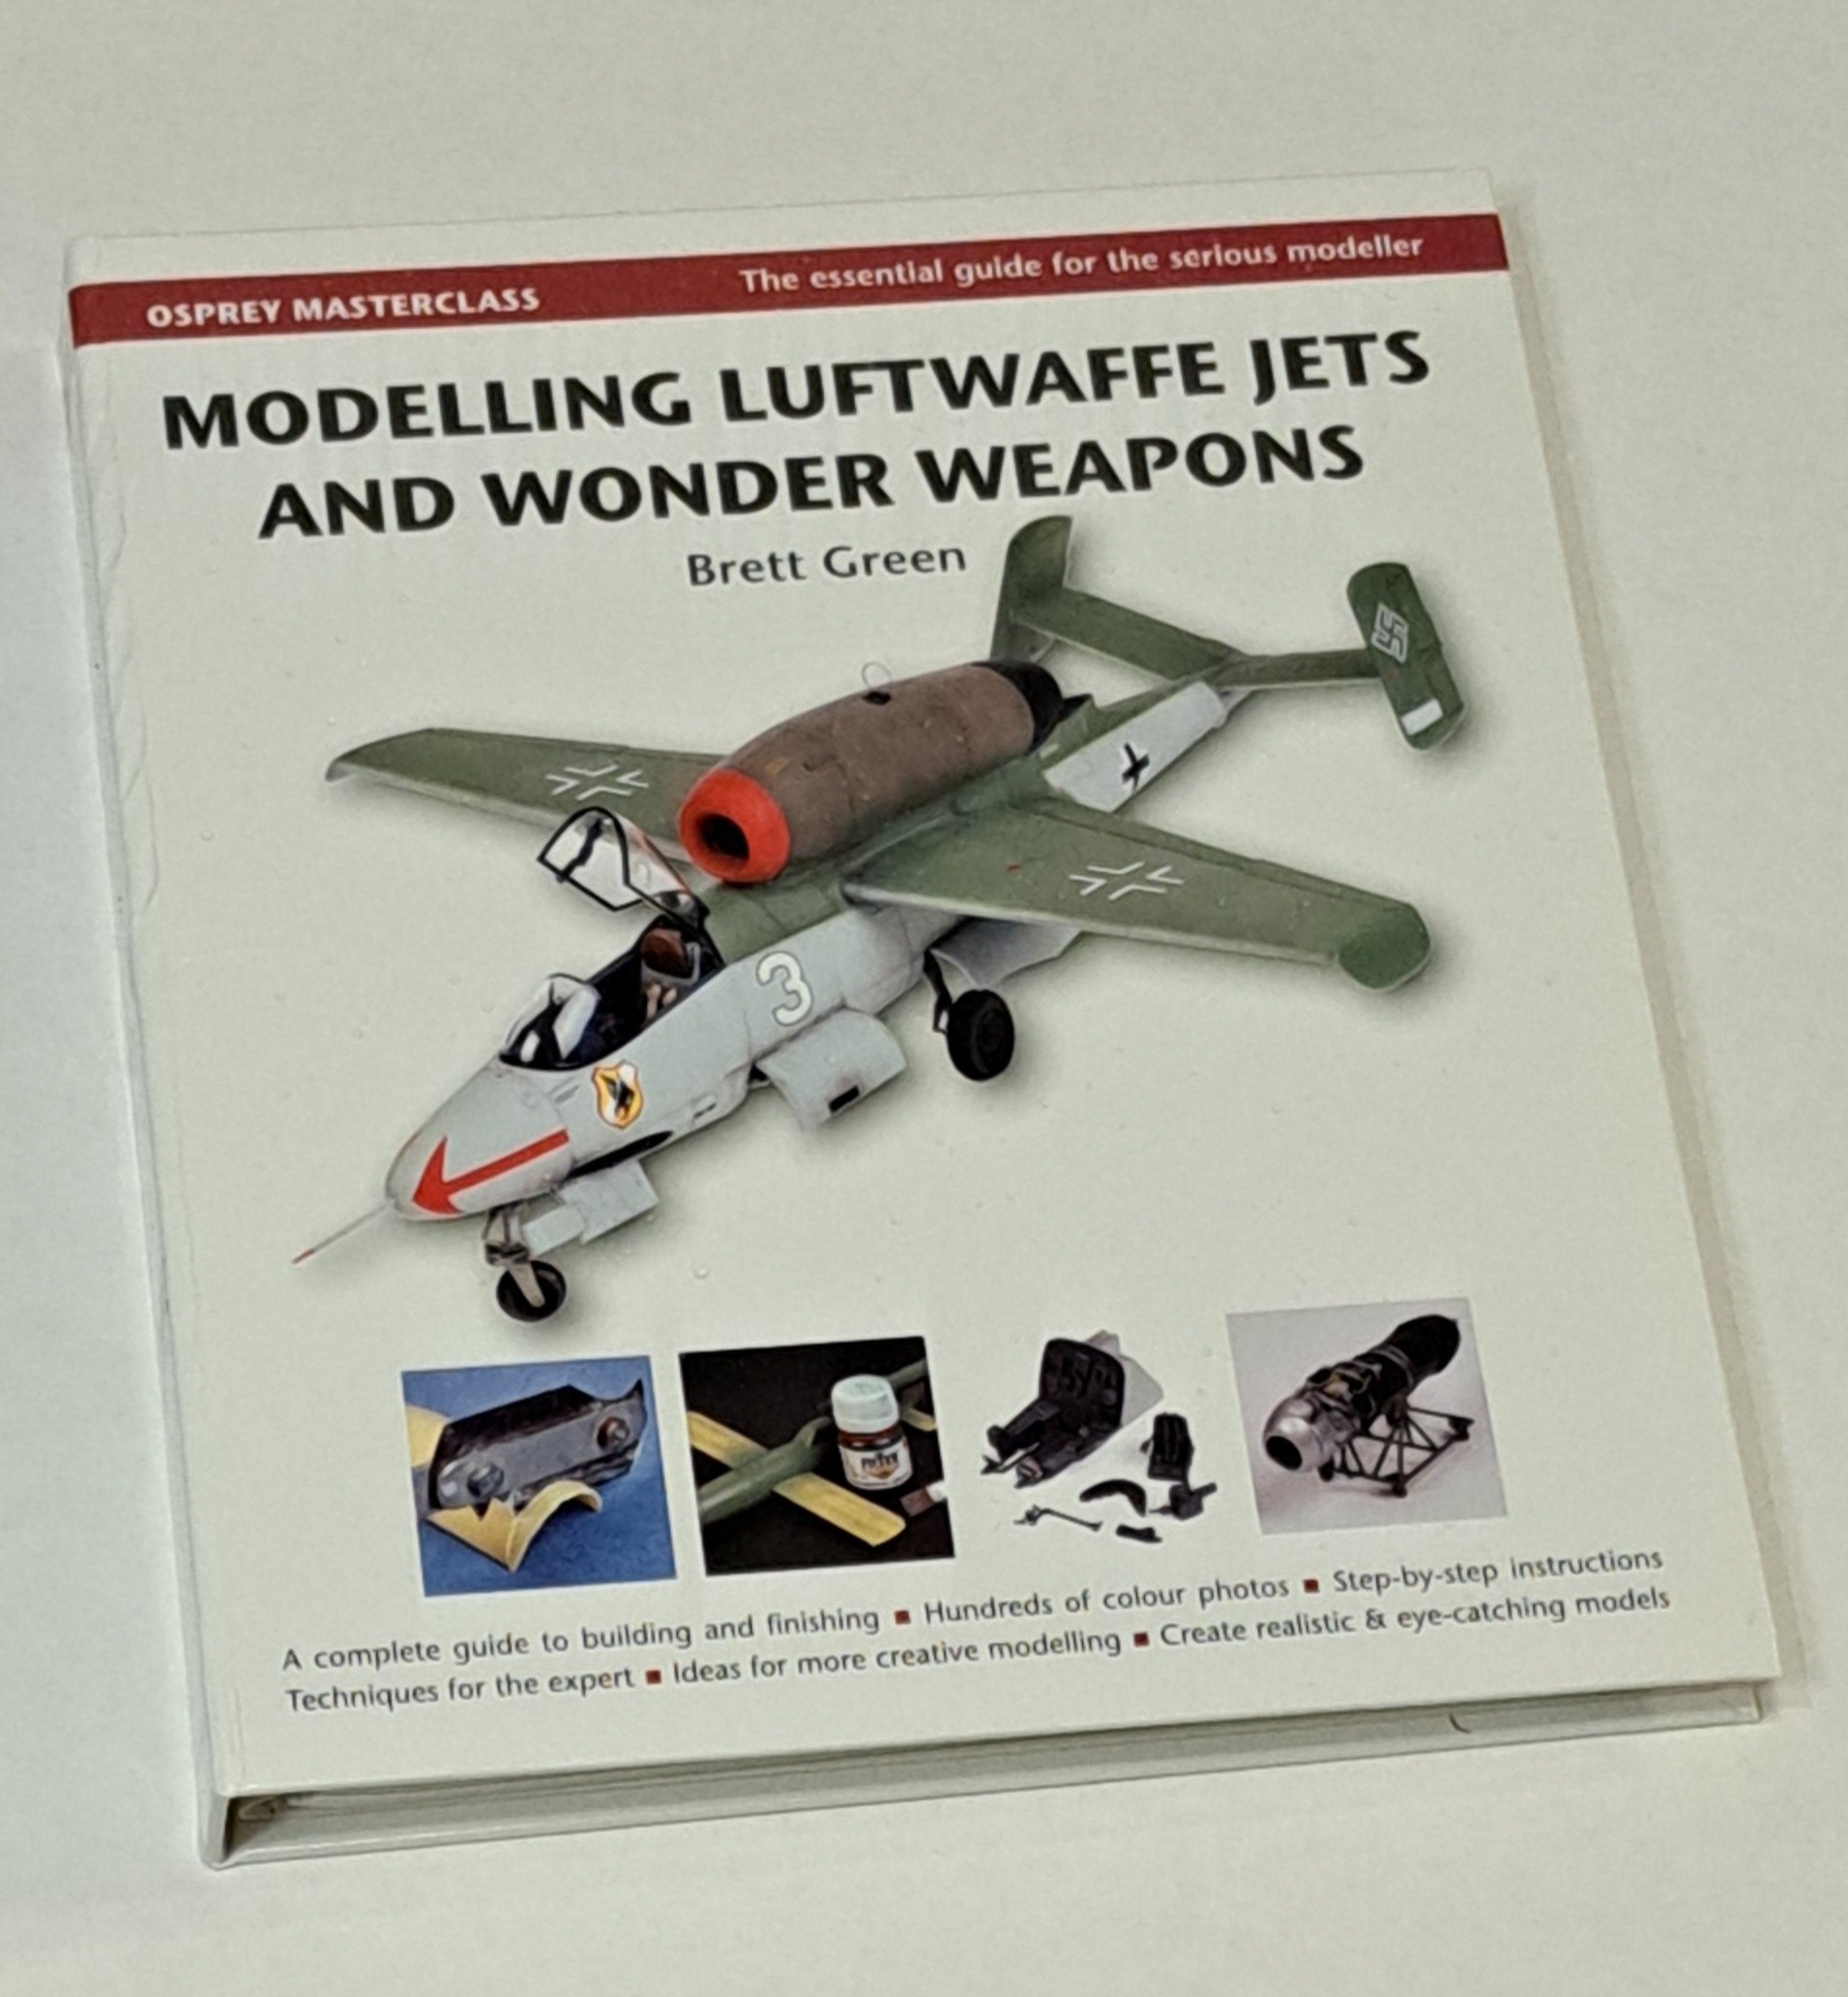 Modelling Luftwaffe Jets and Wonder Weapons by Brett Green